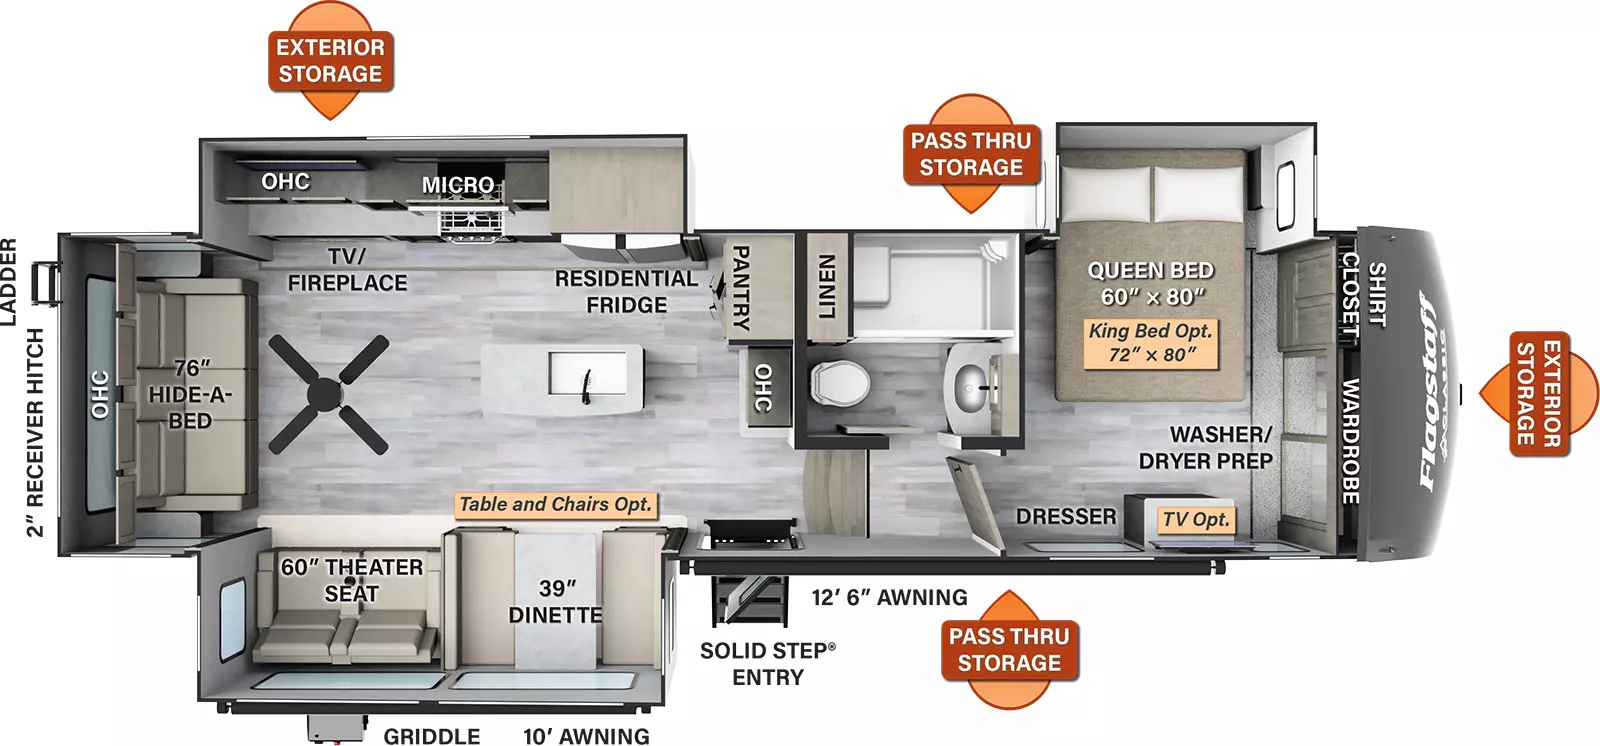 The 8529RLBS has three slide outs and one entry door. Exterior features include a 10 foot awning and a 12 foot 6 inch awning on the door side. Interior layout from front to back: off door side slide out queen bed, front wardrobe with washer/dryer prep, shirt closet, and dresser (optional TV and king bed); side aisle full bathroom; pantry, overhead cabinet, countertop, and island with sink; off door side slideout with residential refrigerator, microwave, cooktop, overhead cabinets, and entertainment center with TV and fireplace; door side slideout with dinette (optional table and chairs) and theater seat; hide a bed sofa, overhead cabinet and paddle fan in the rear.